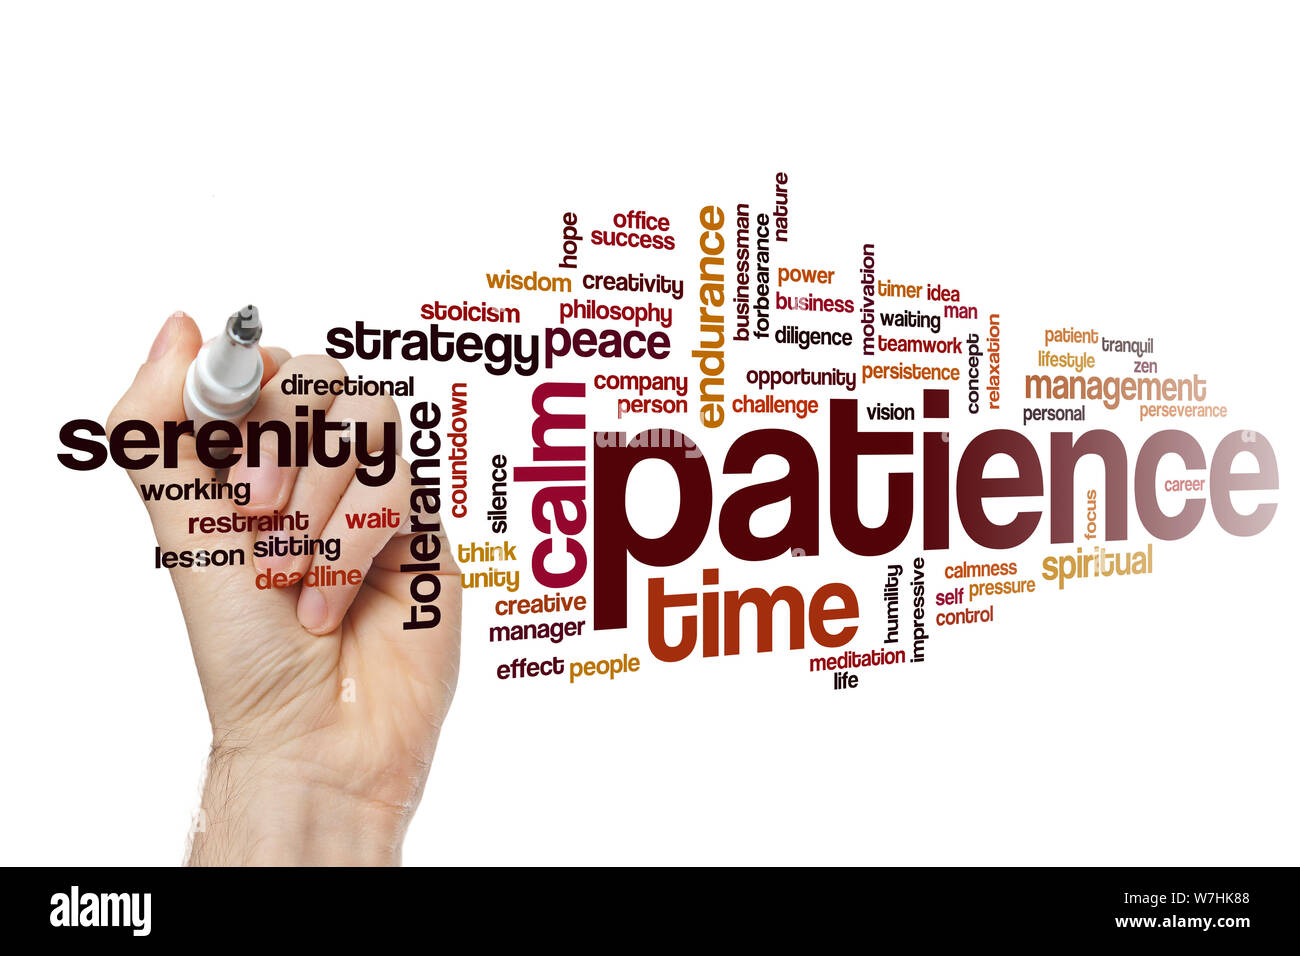 Patience word cloud concept Stock Photo